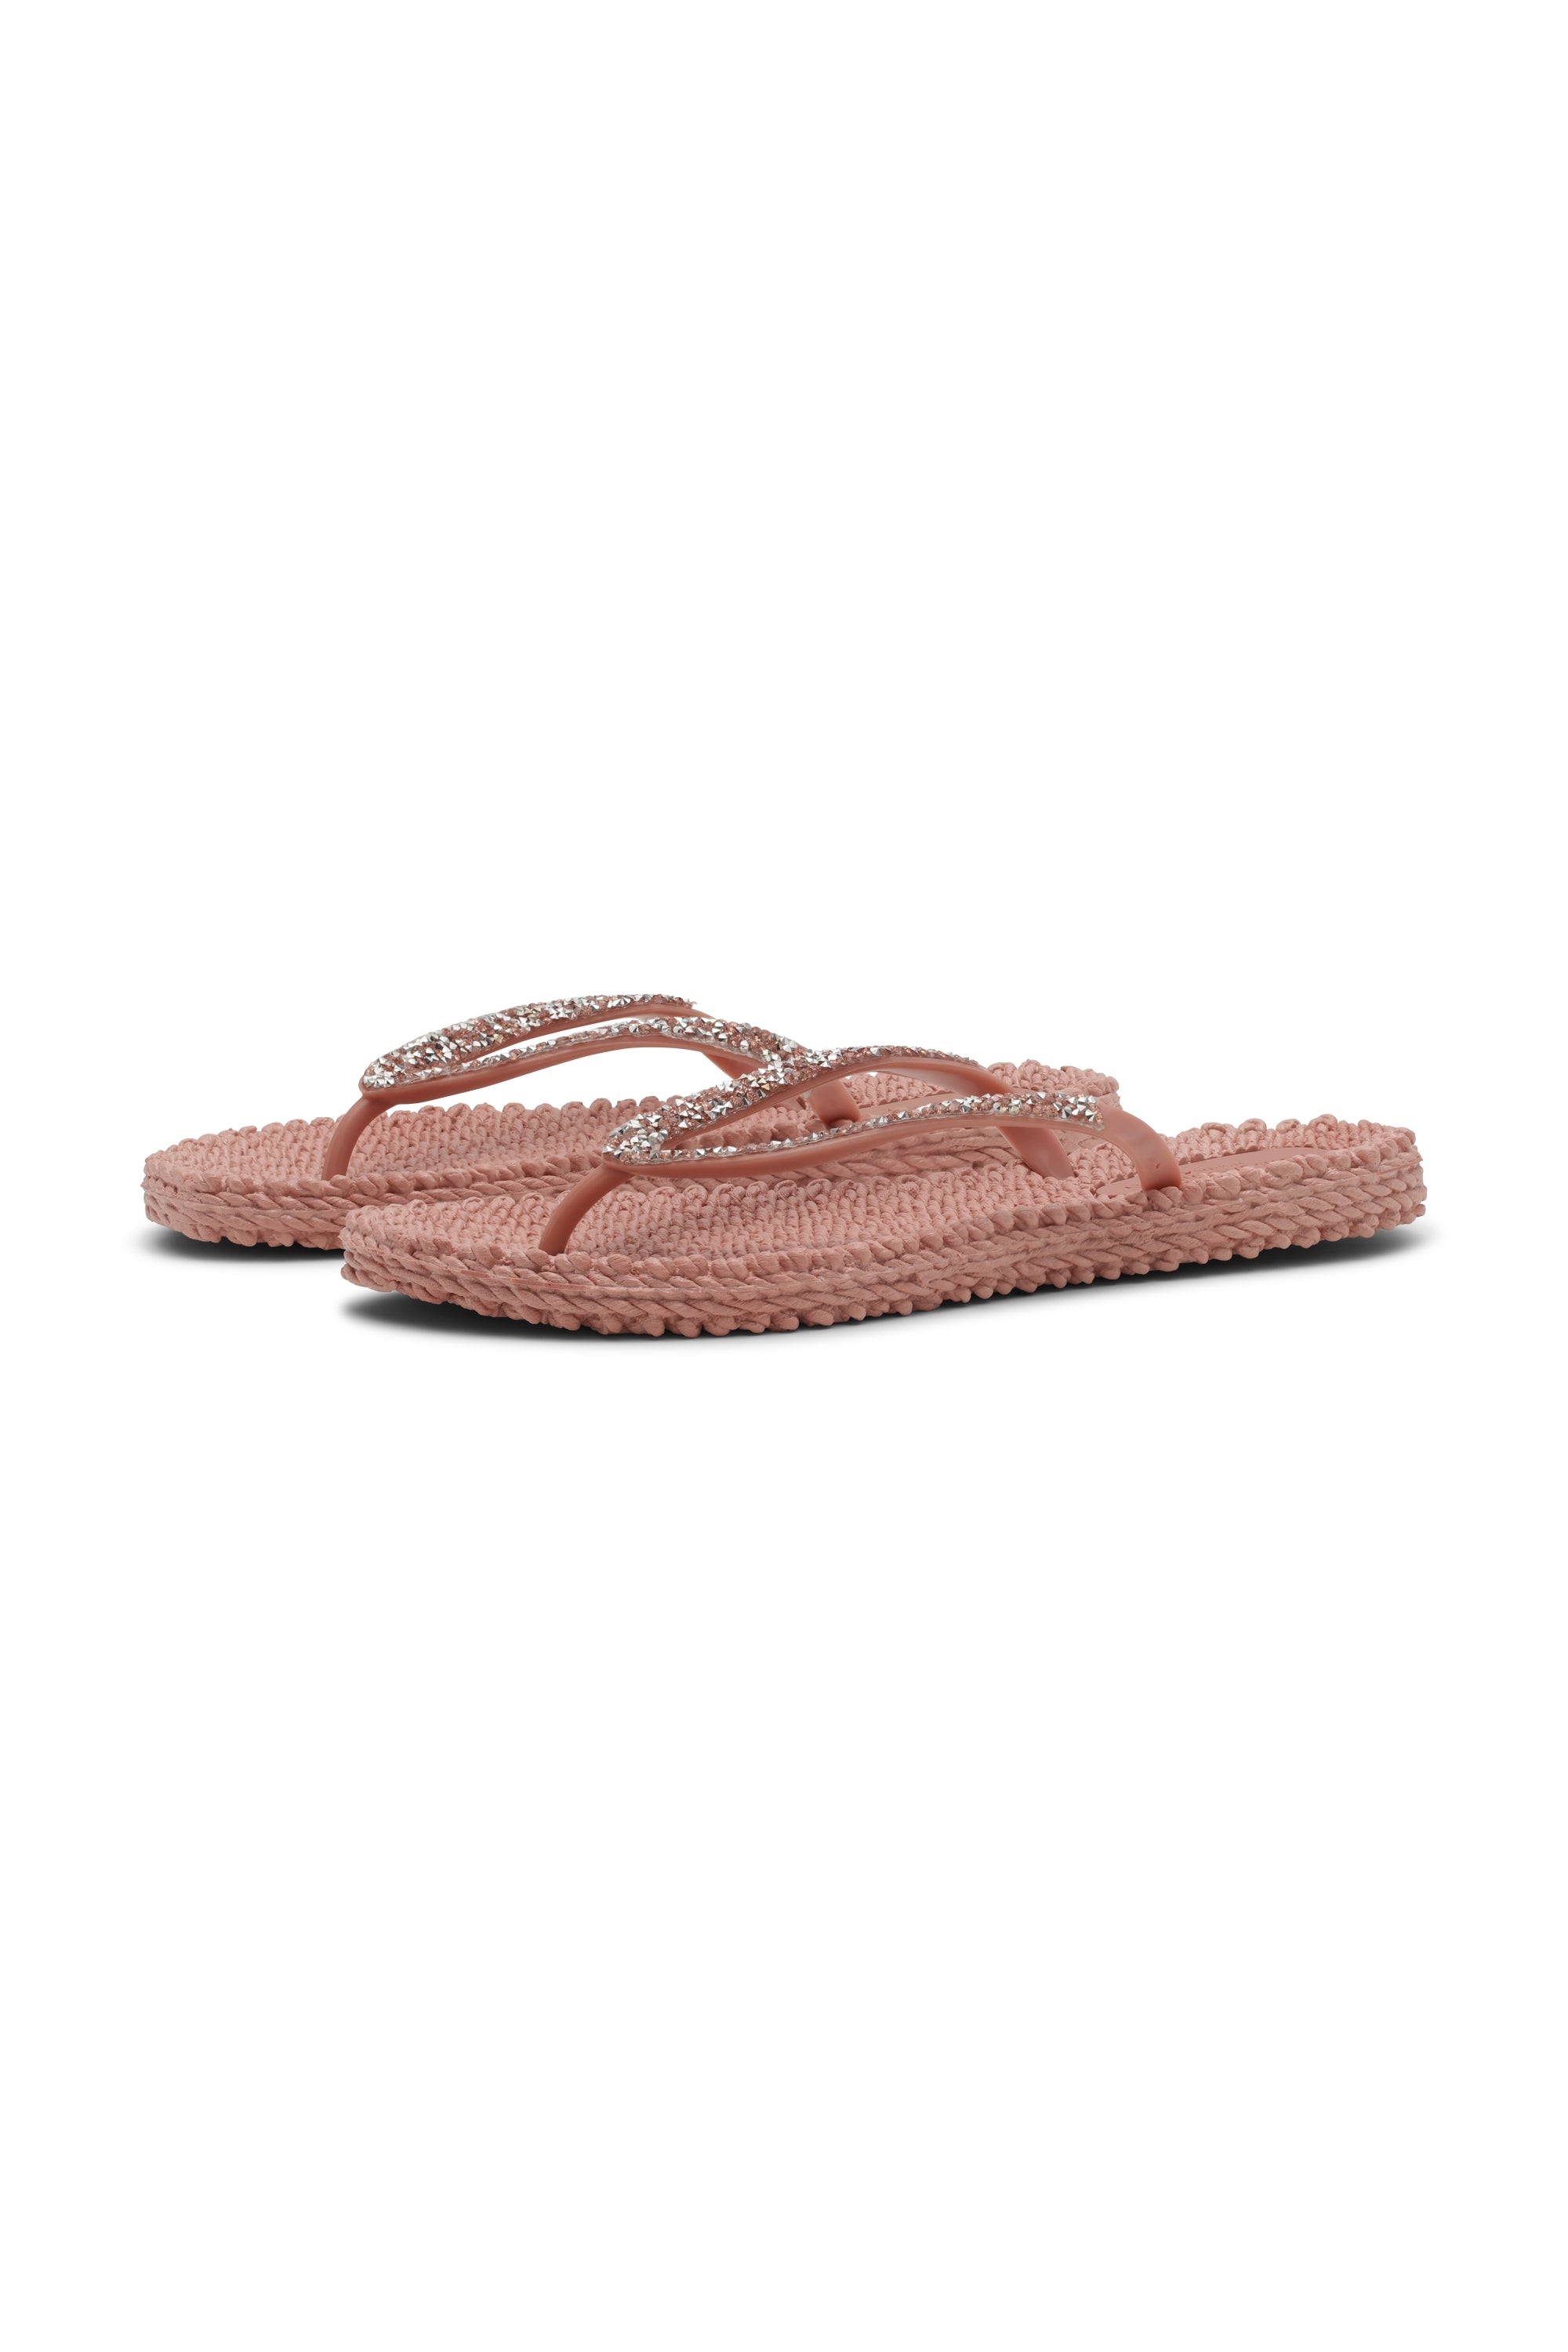 Flip Flop in color misty rose with glitter strips by Ilse Jacobsen